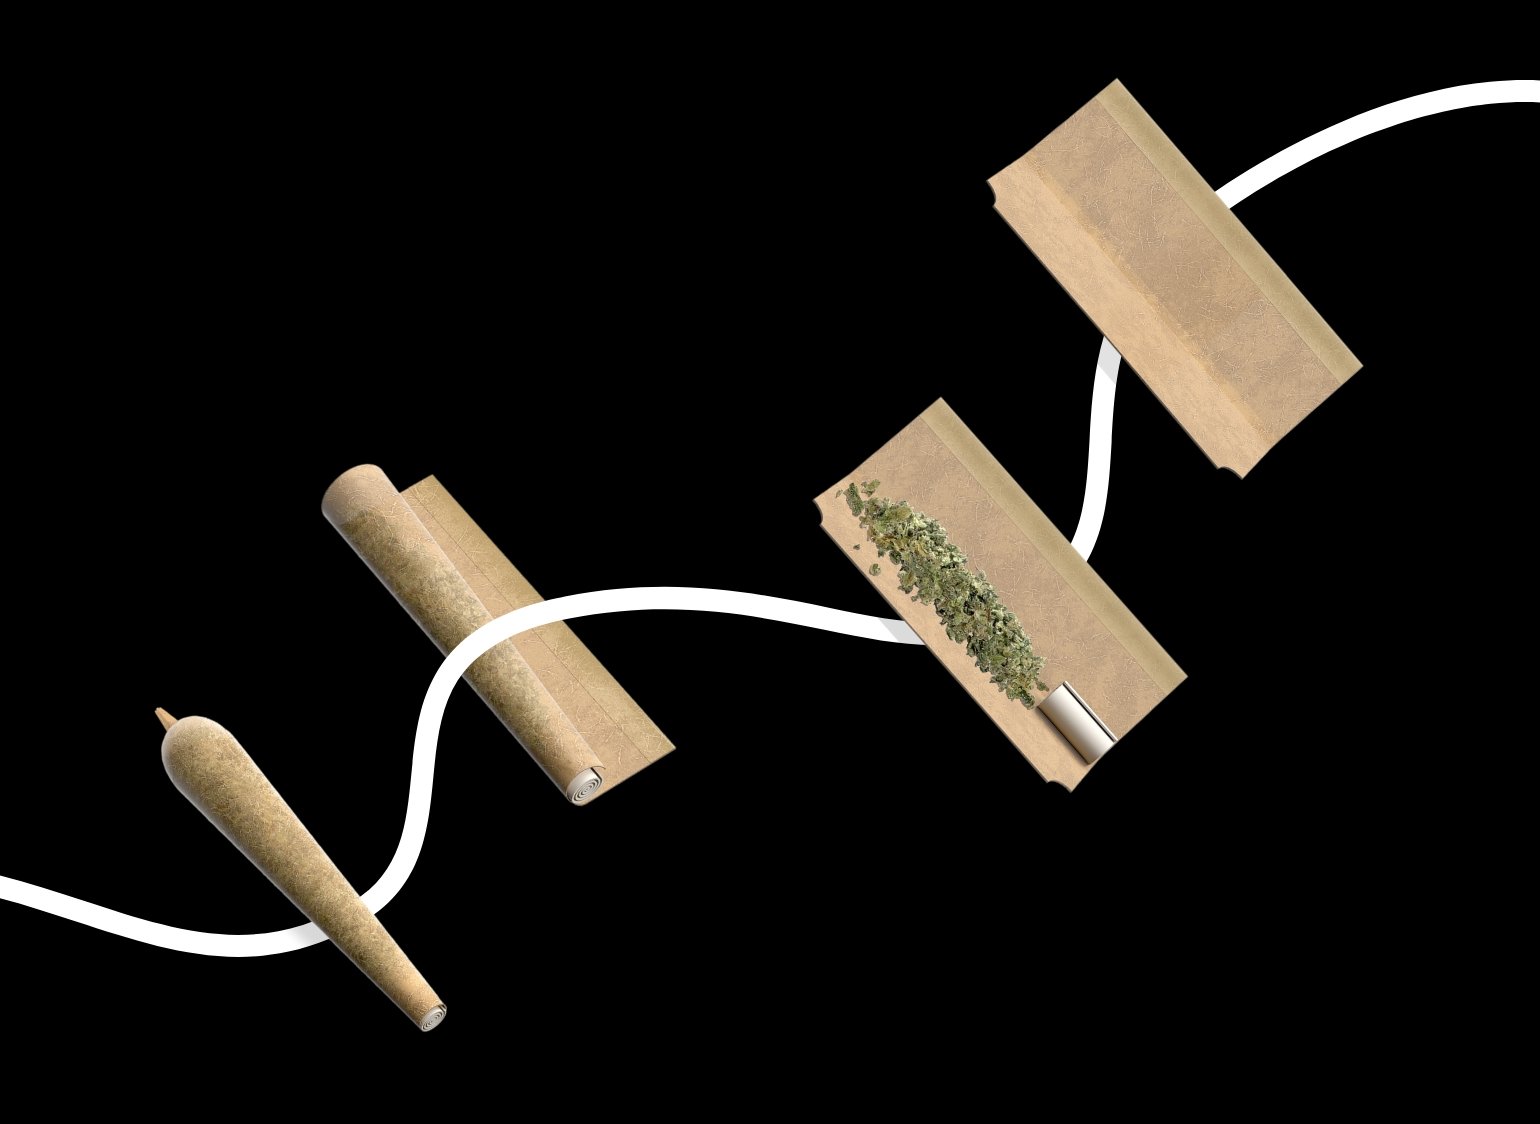 Learn the art of rolling a perfect joint with these easy step-by-step instructions. From preparing your materials to mastering the rolling technique, this guide covers everything you need to know to roll a smooth and even joint.